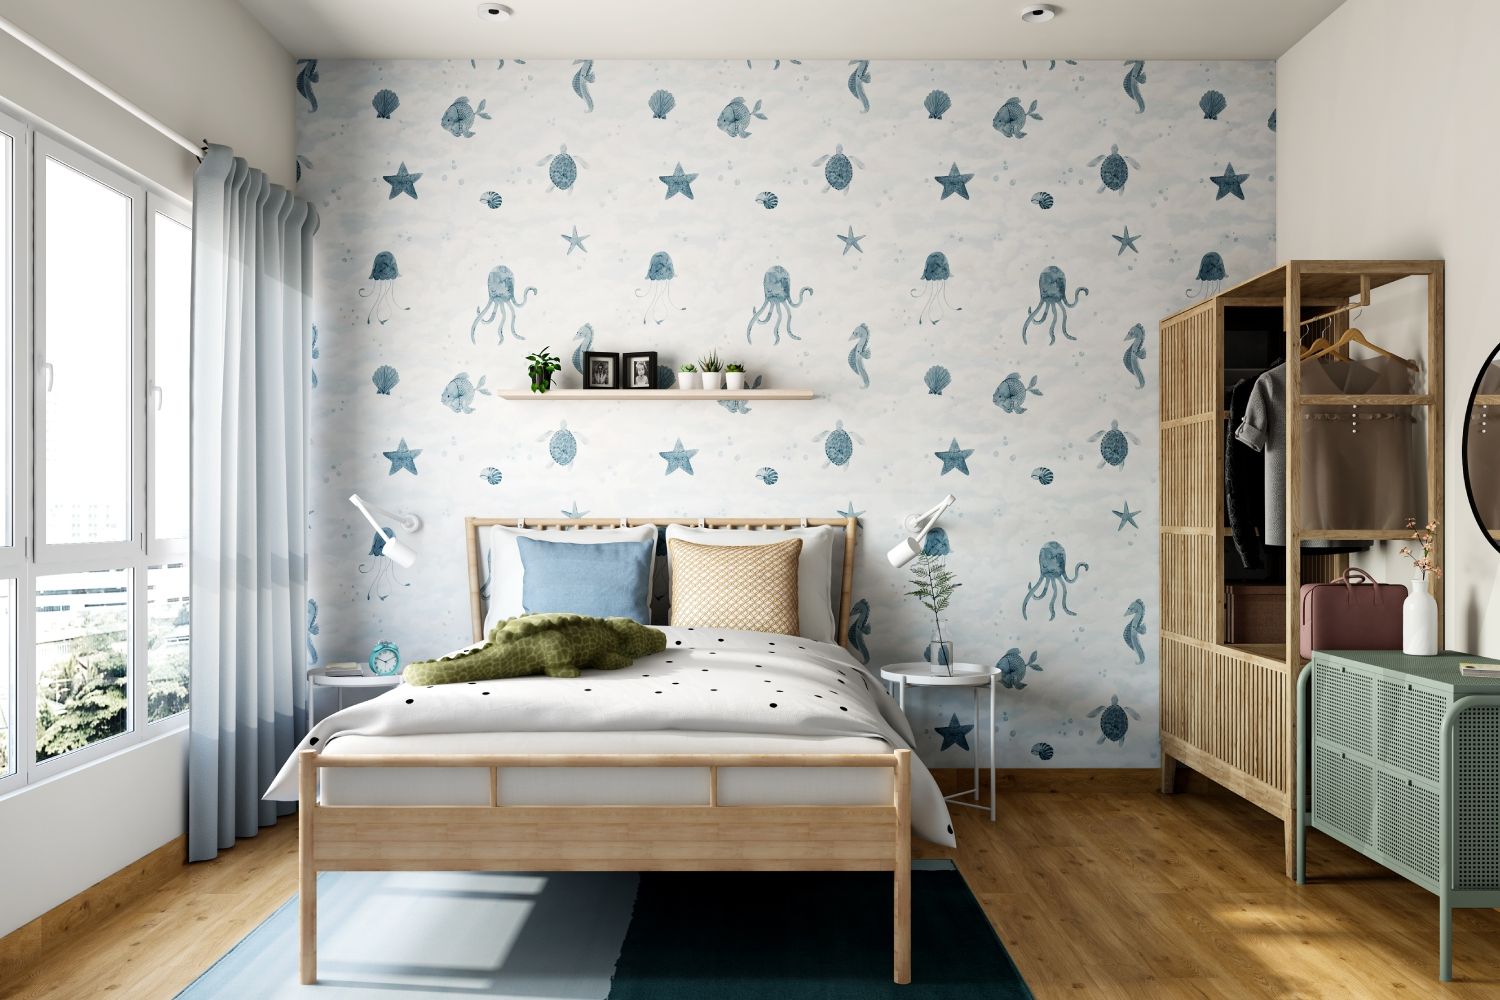 Contemporary White And Blue Aquatic-Themed Kids Room Wallpaper Design